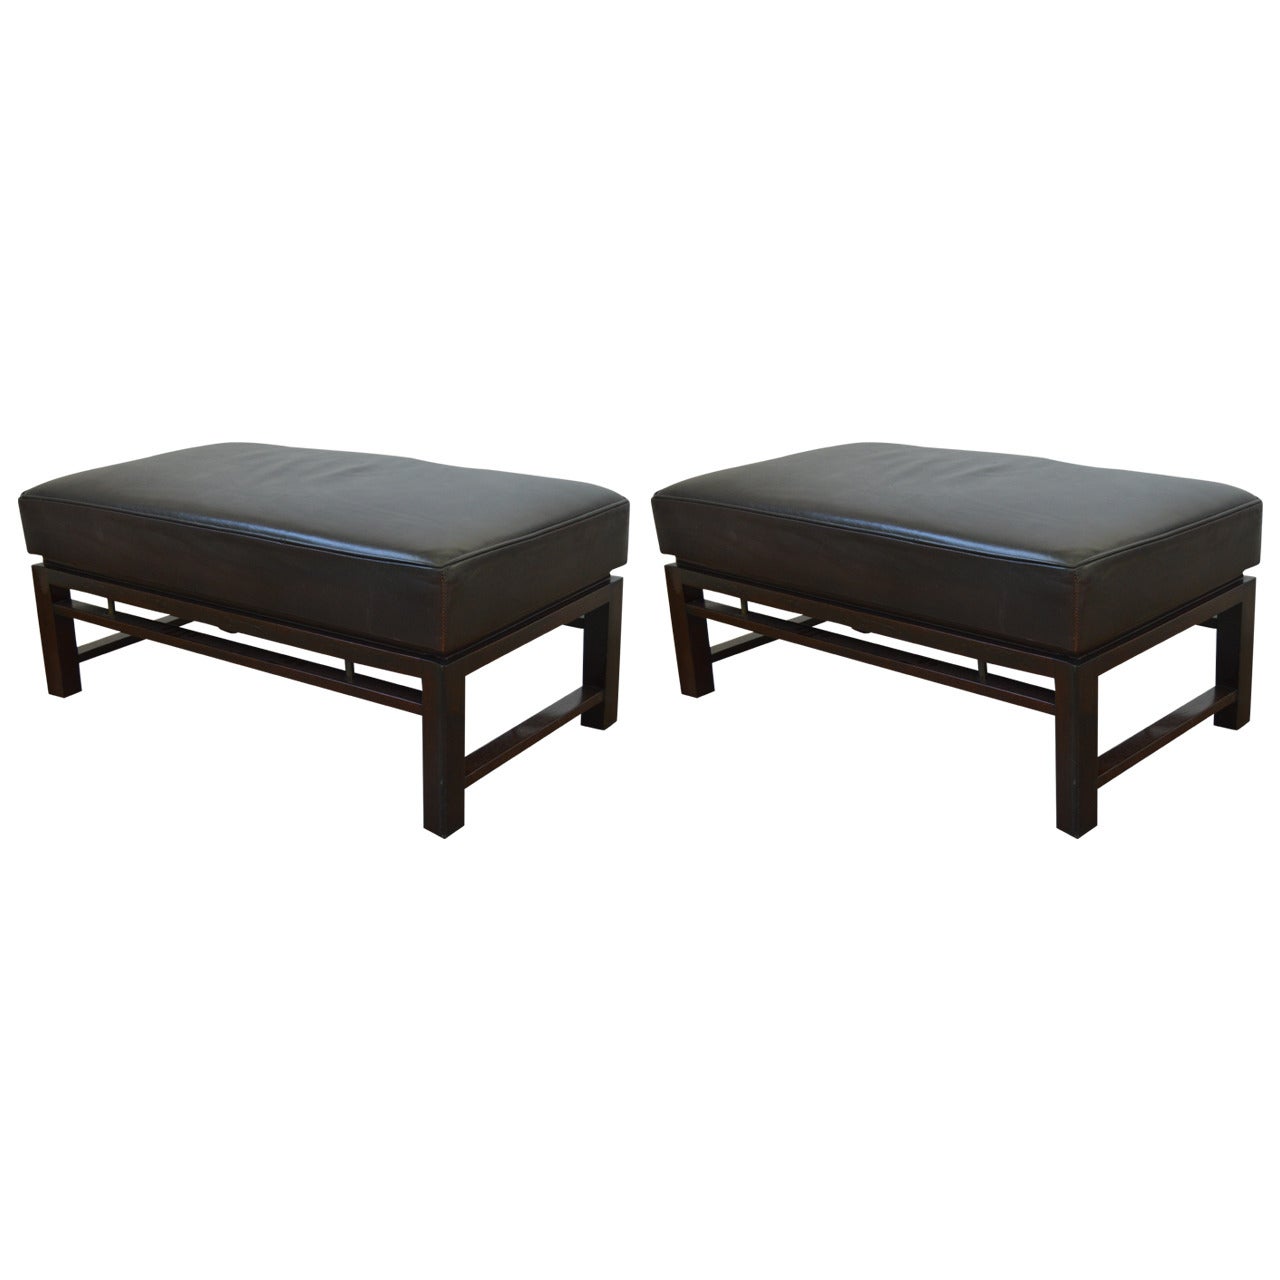 Pair of Leather Benches